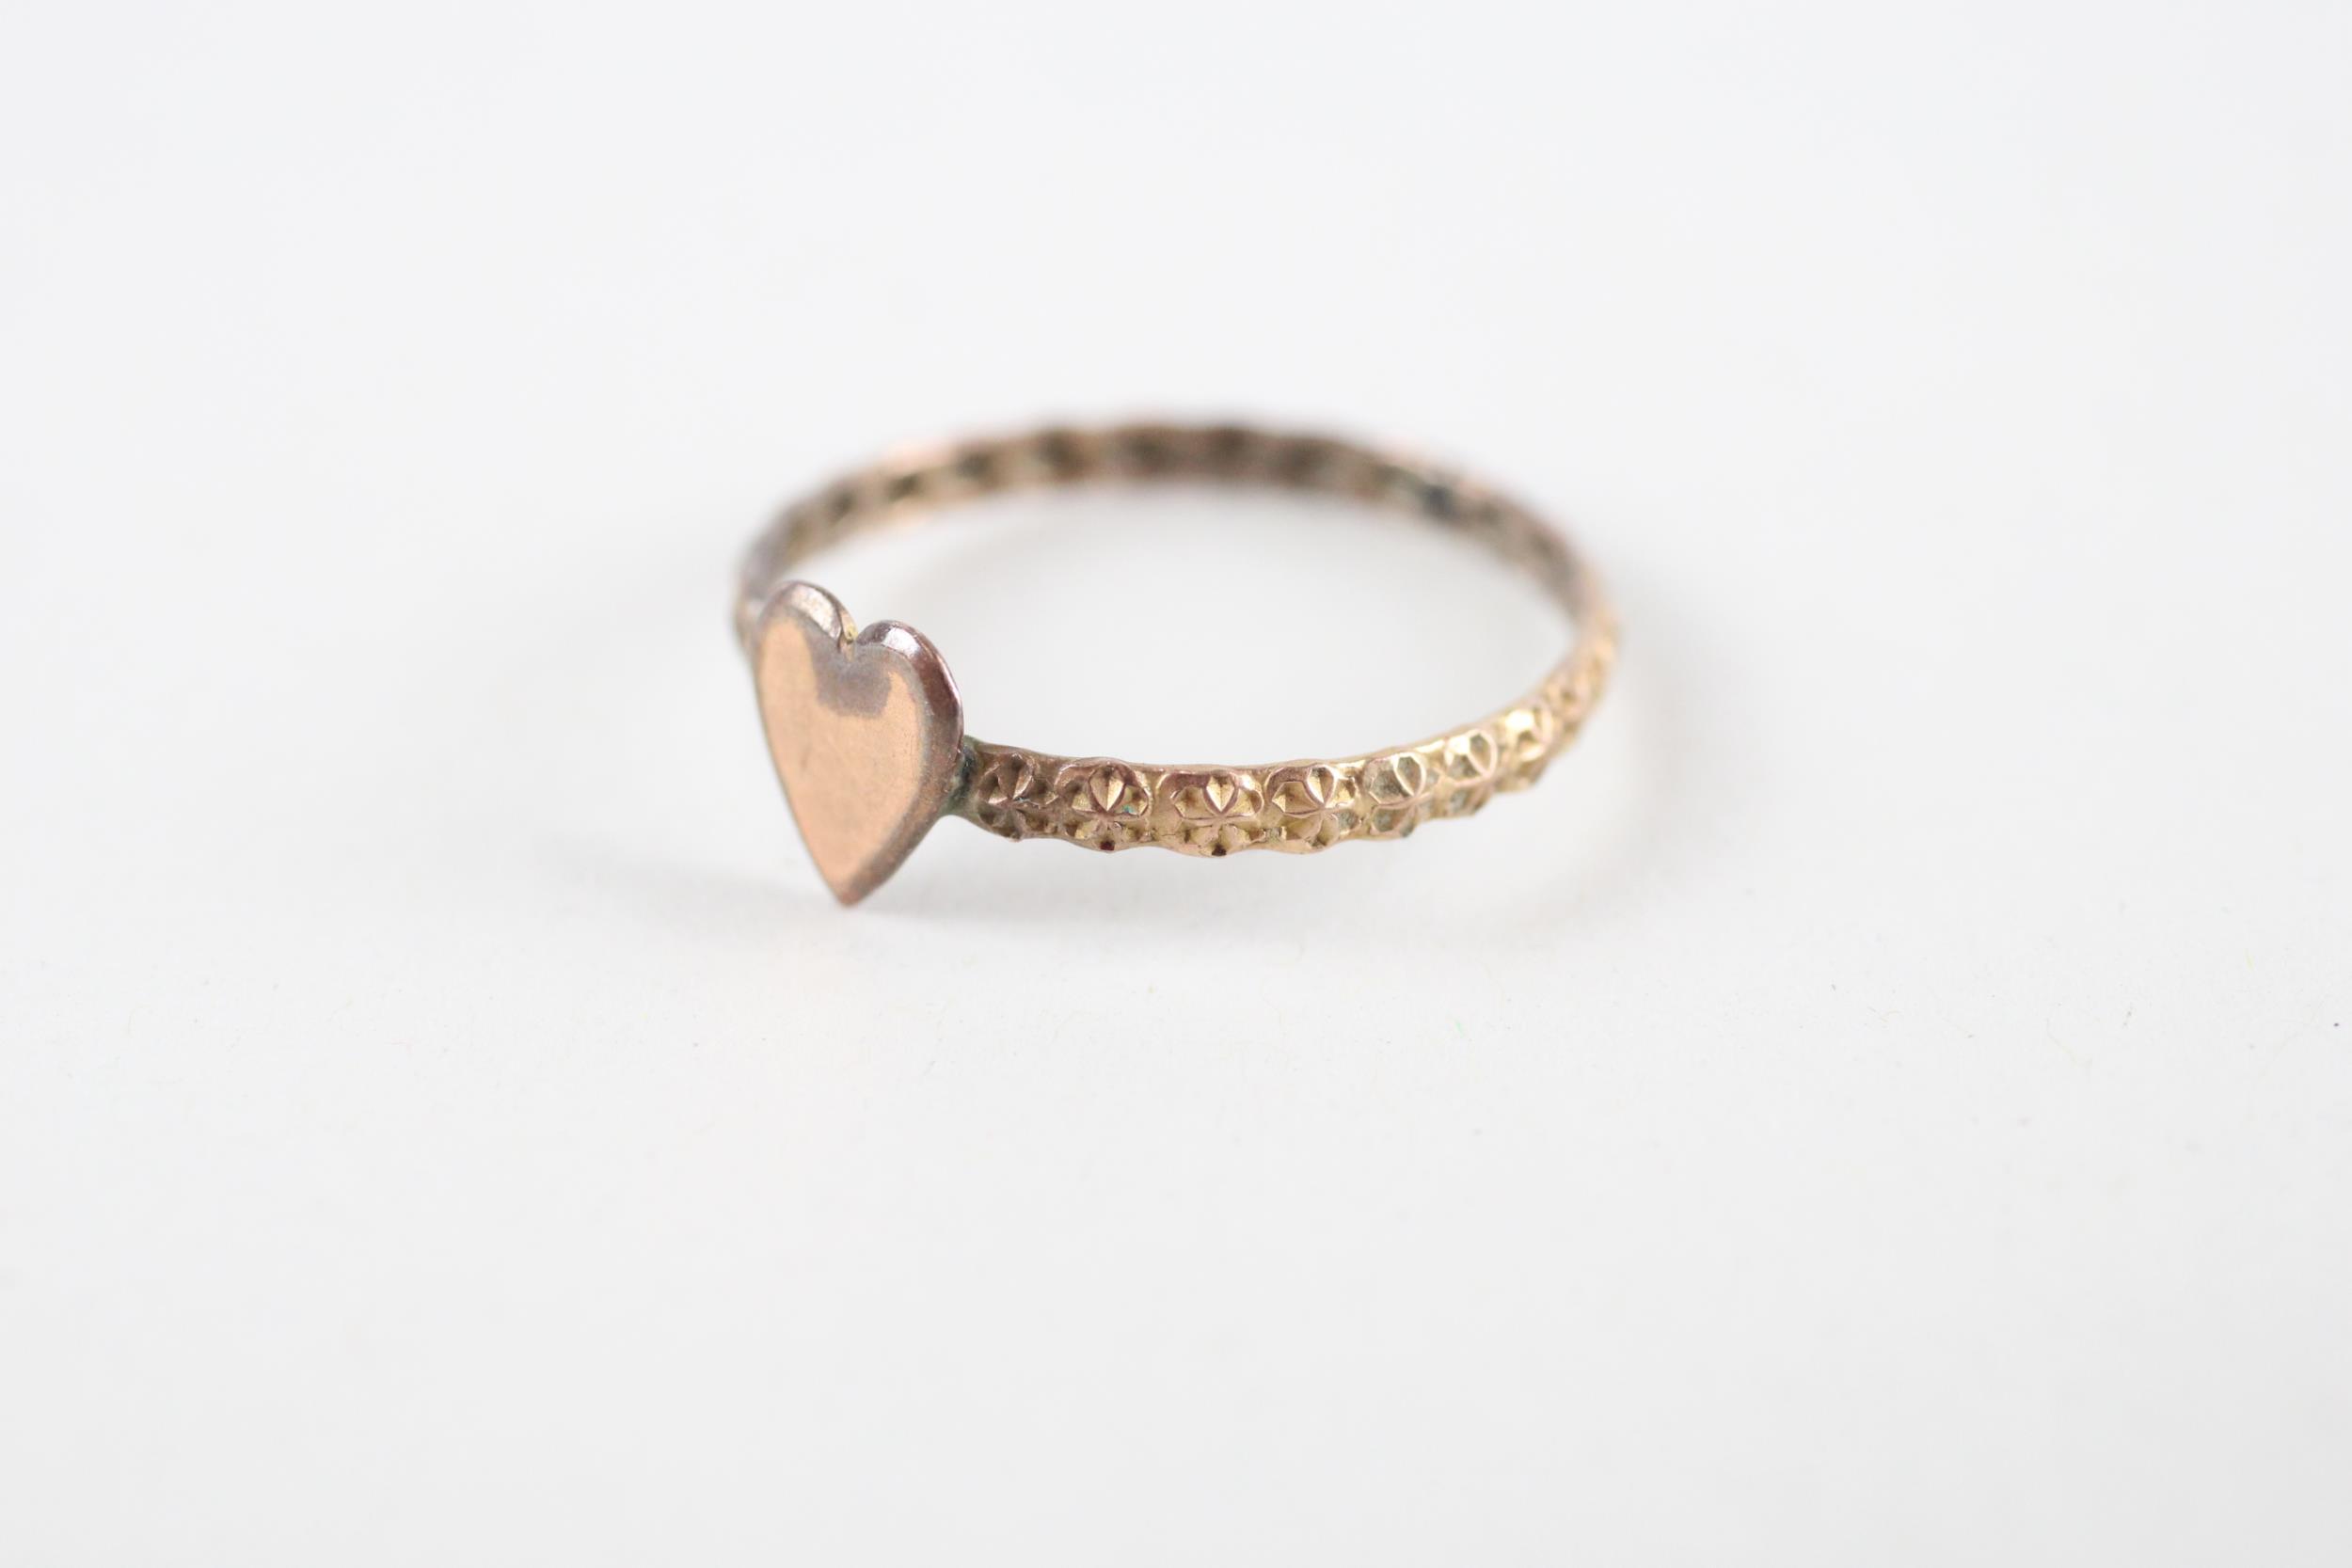 9ct gold heart shaped ring (0.9g) Size R - Image 3 of 4